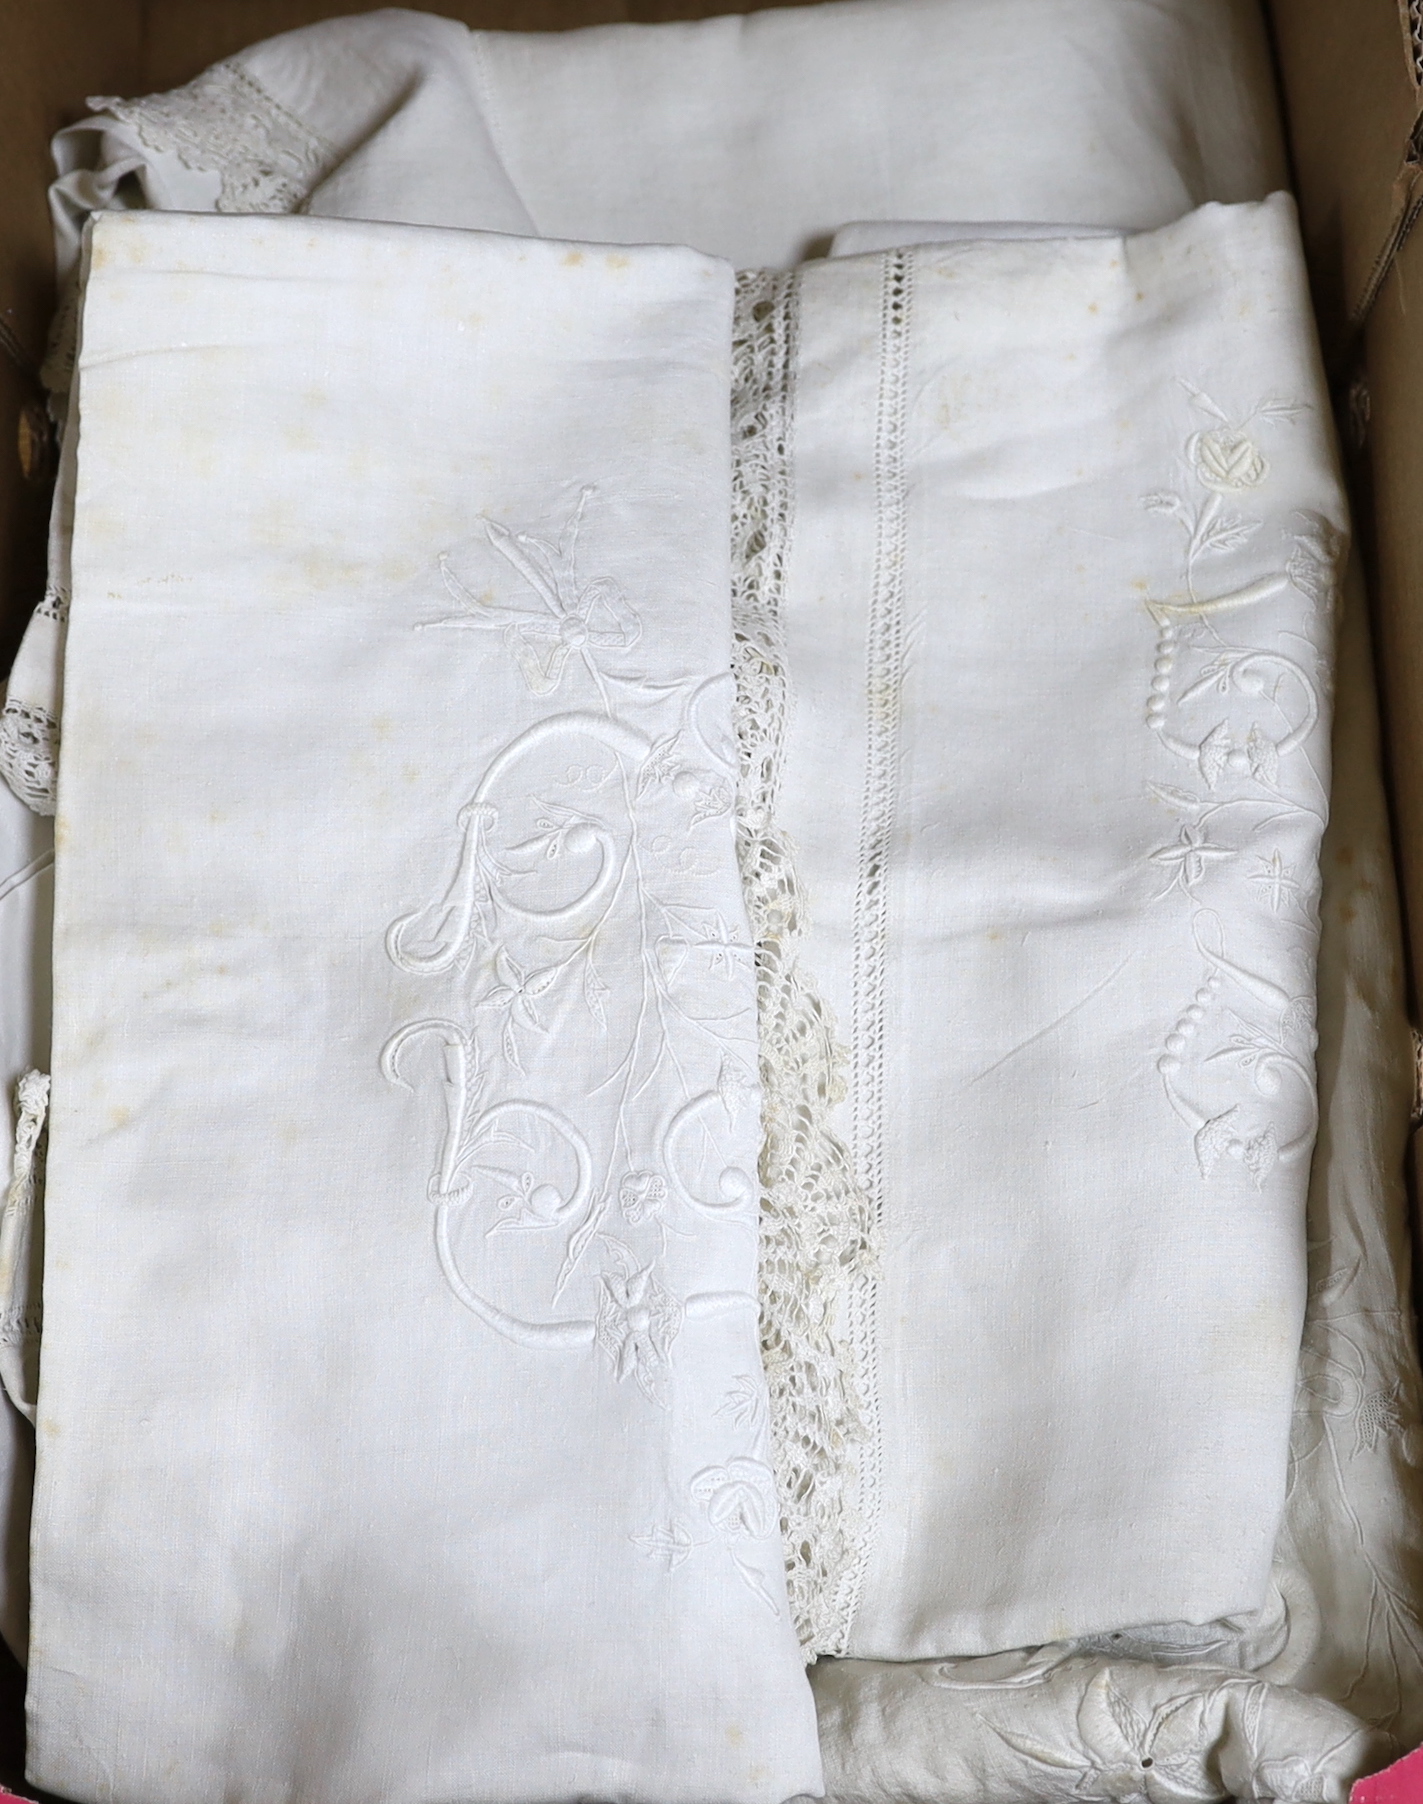 A monogrammed and embroidered lace edged French provincial linen sheet and pillowcase set (3), together with another lace inserted sheet and two plain pillowcases